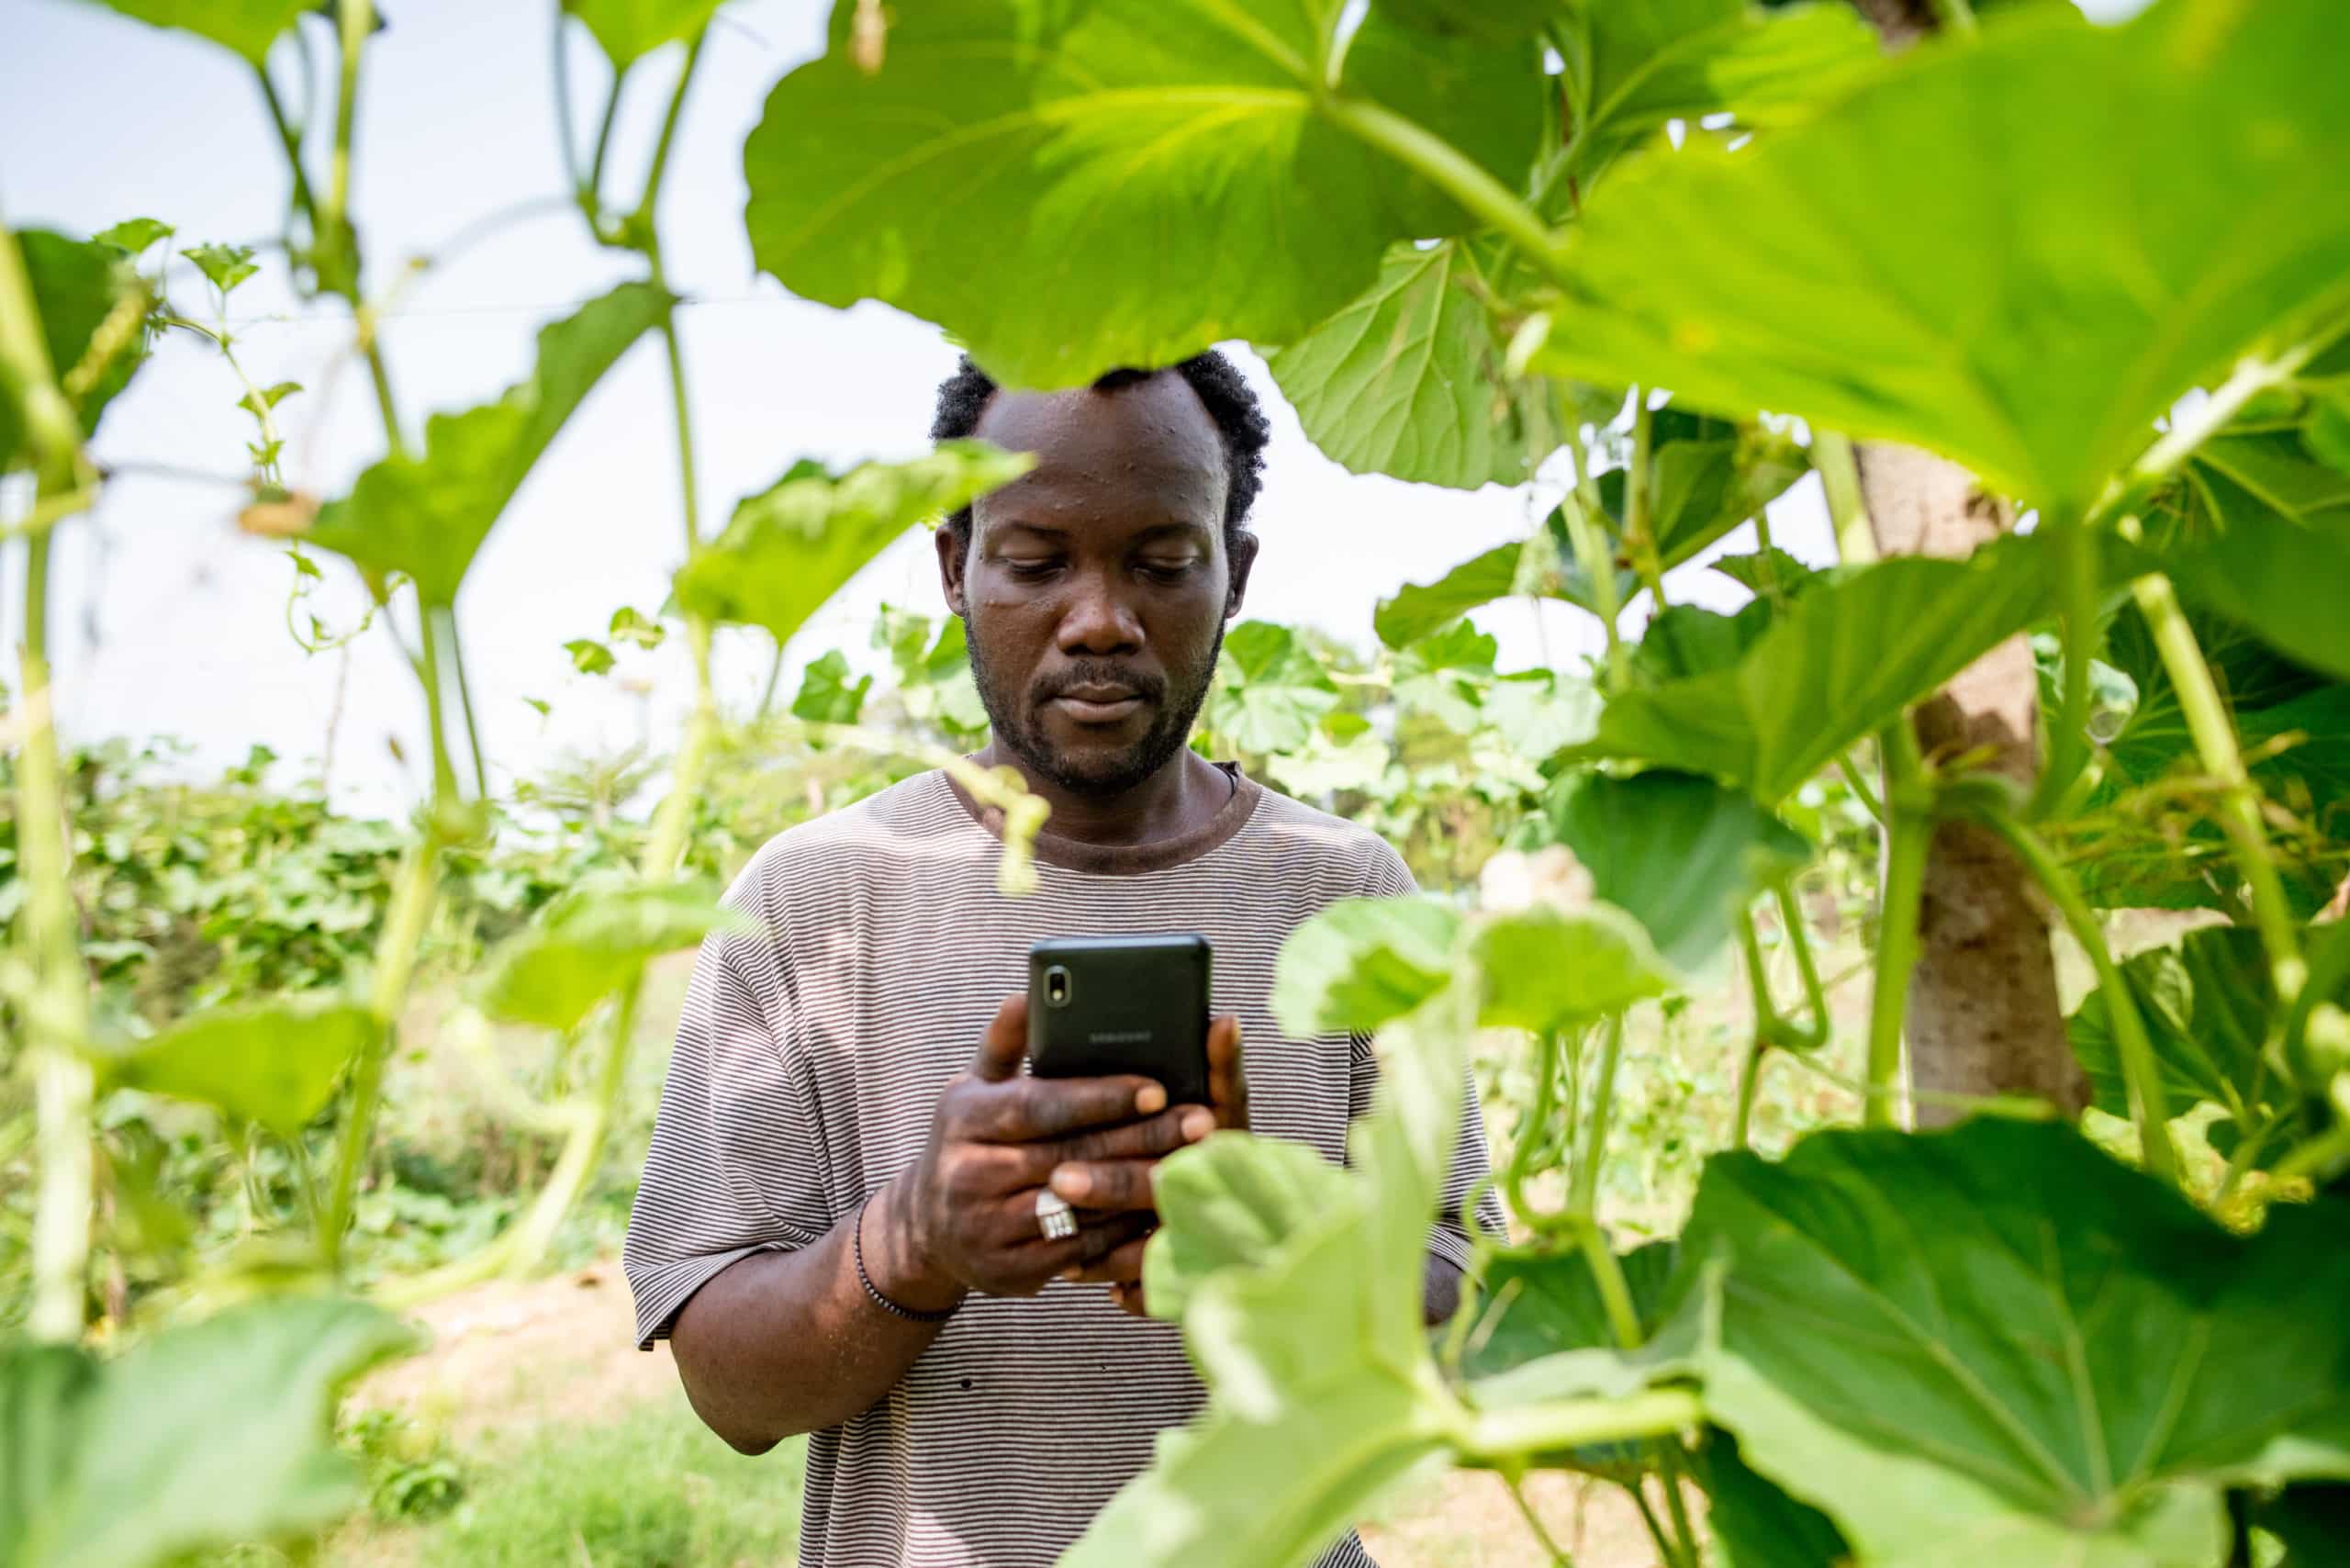 How Agricultural Organizations Can Engage Farmers Using Mista’s Communications Platform